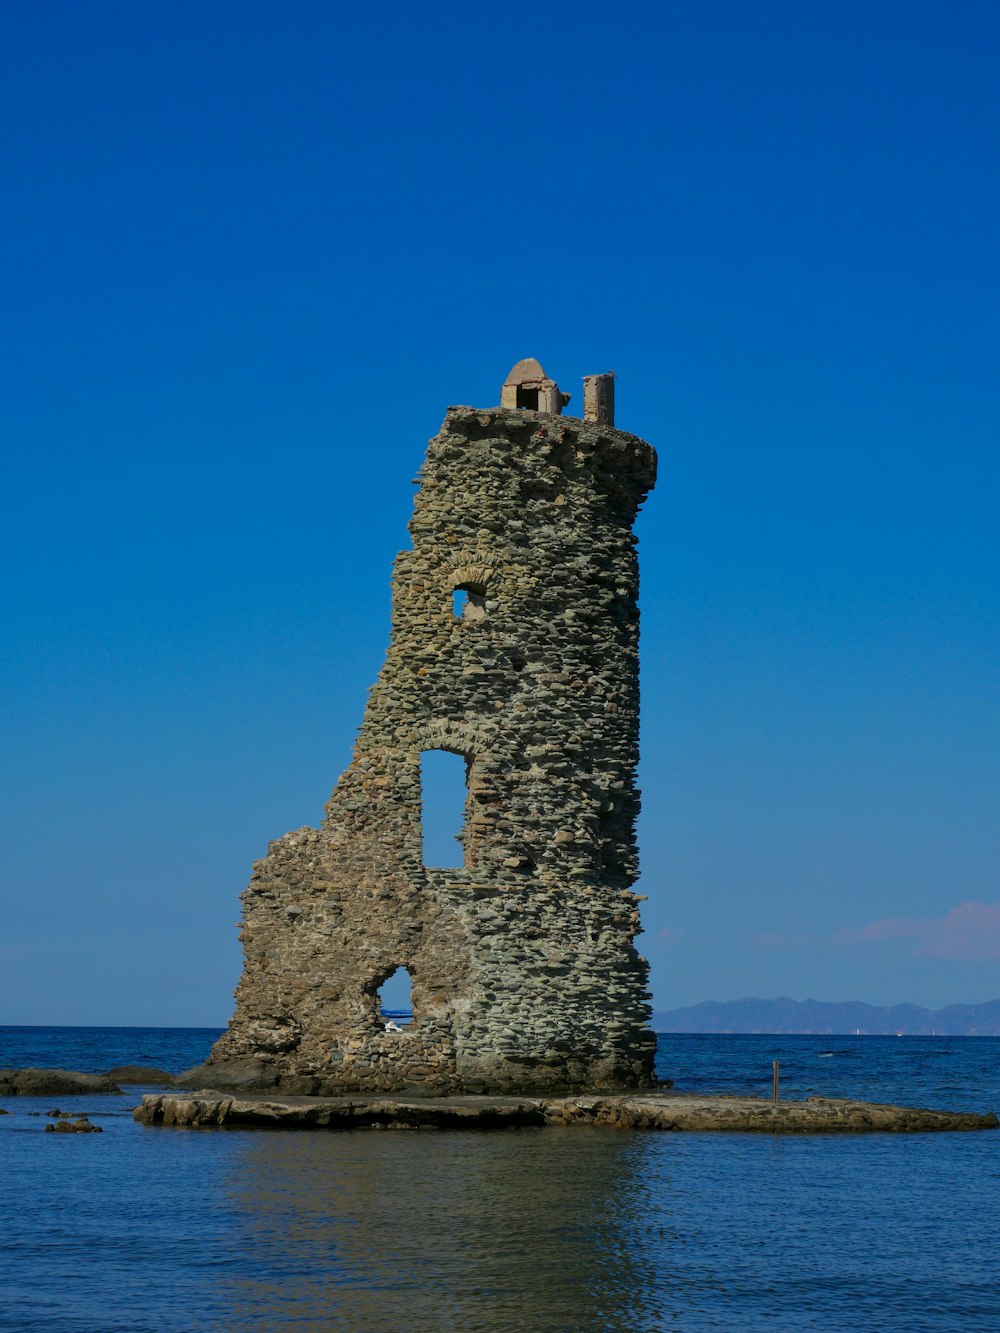 a stone tower sitting in the middle of a body of water